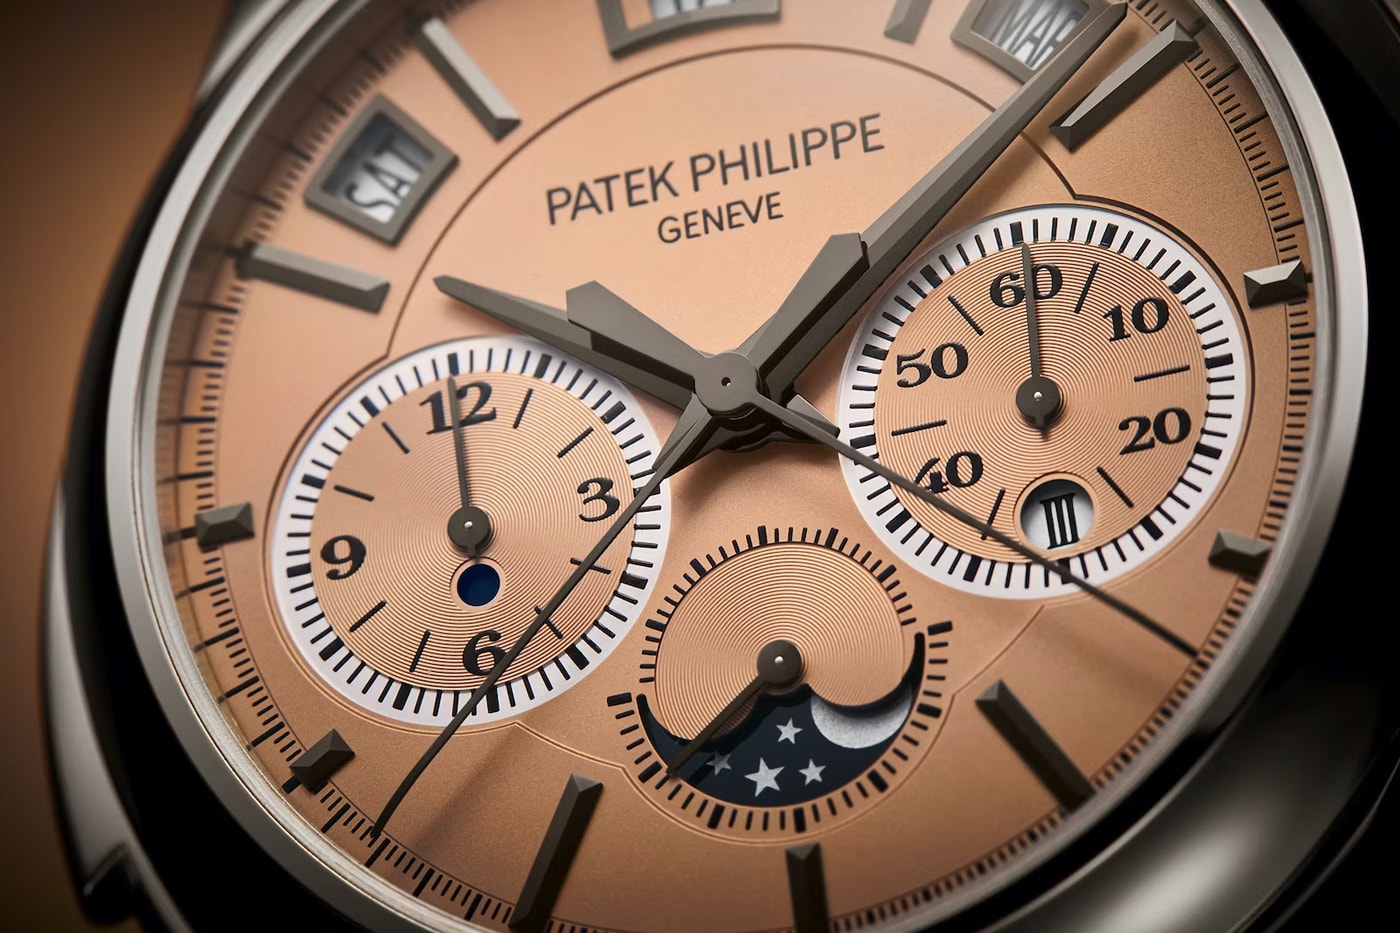 Patek Philippe Watch Art Grand Exhibition Tokyo Special Releases Ref. 5308 Minute Repeater Split-Seconds Chronograph Instantaneous Perpetual Calendar Ref. 5331 World Time Minute Repeater Rare Handcrafts Ref. 5330 World Time Date